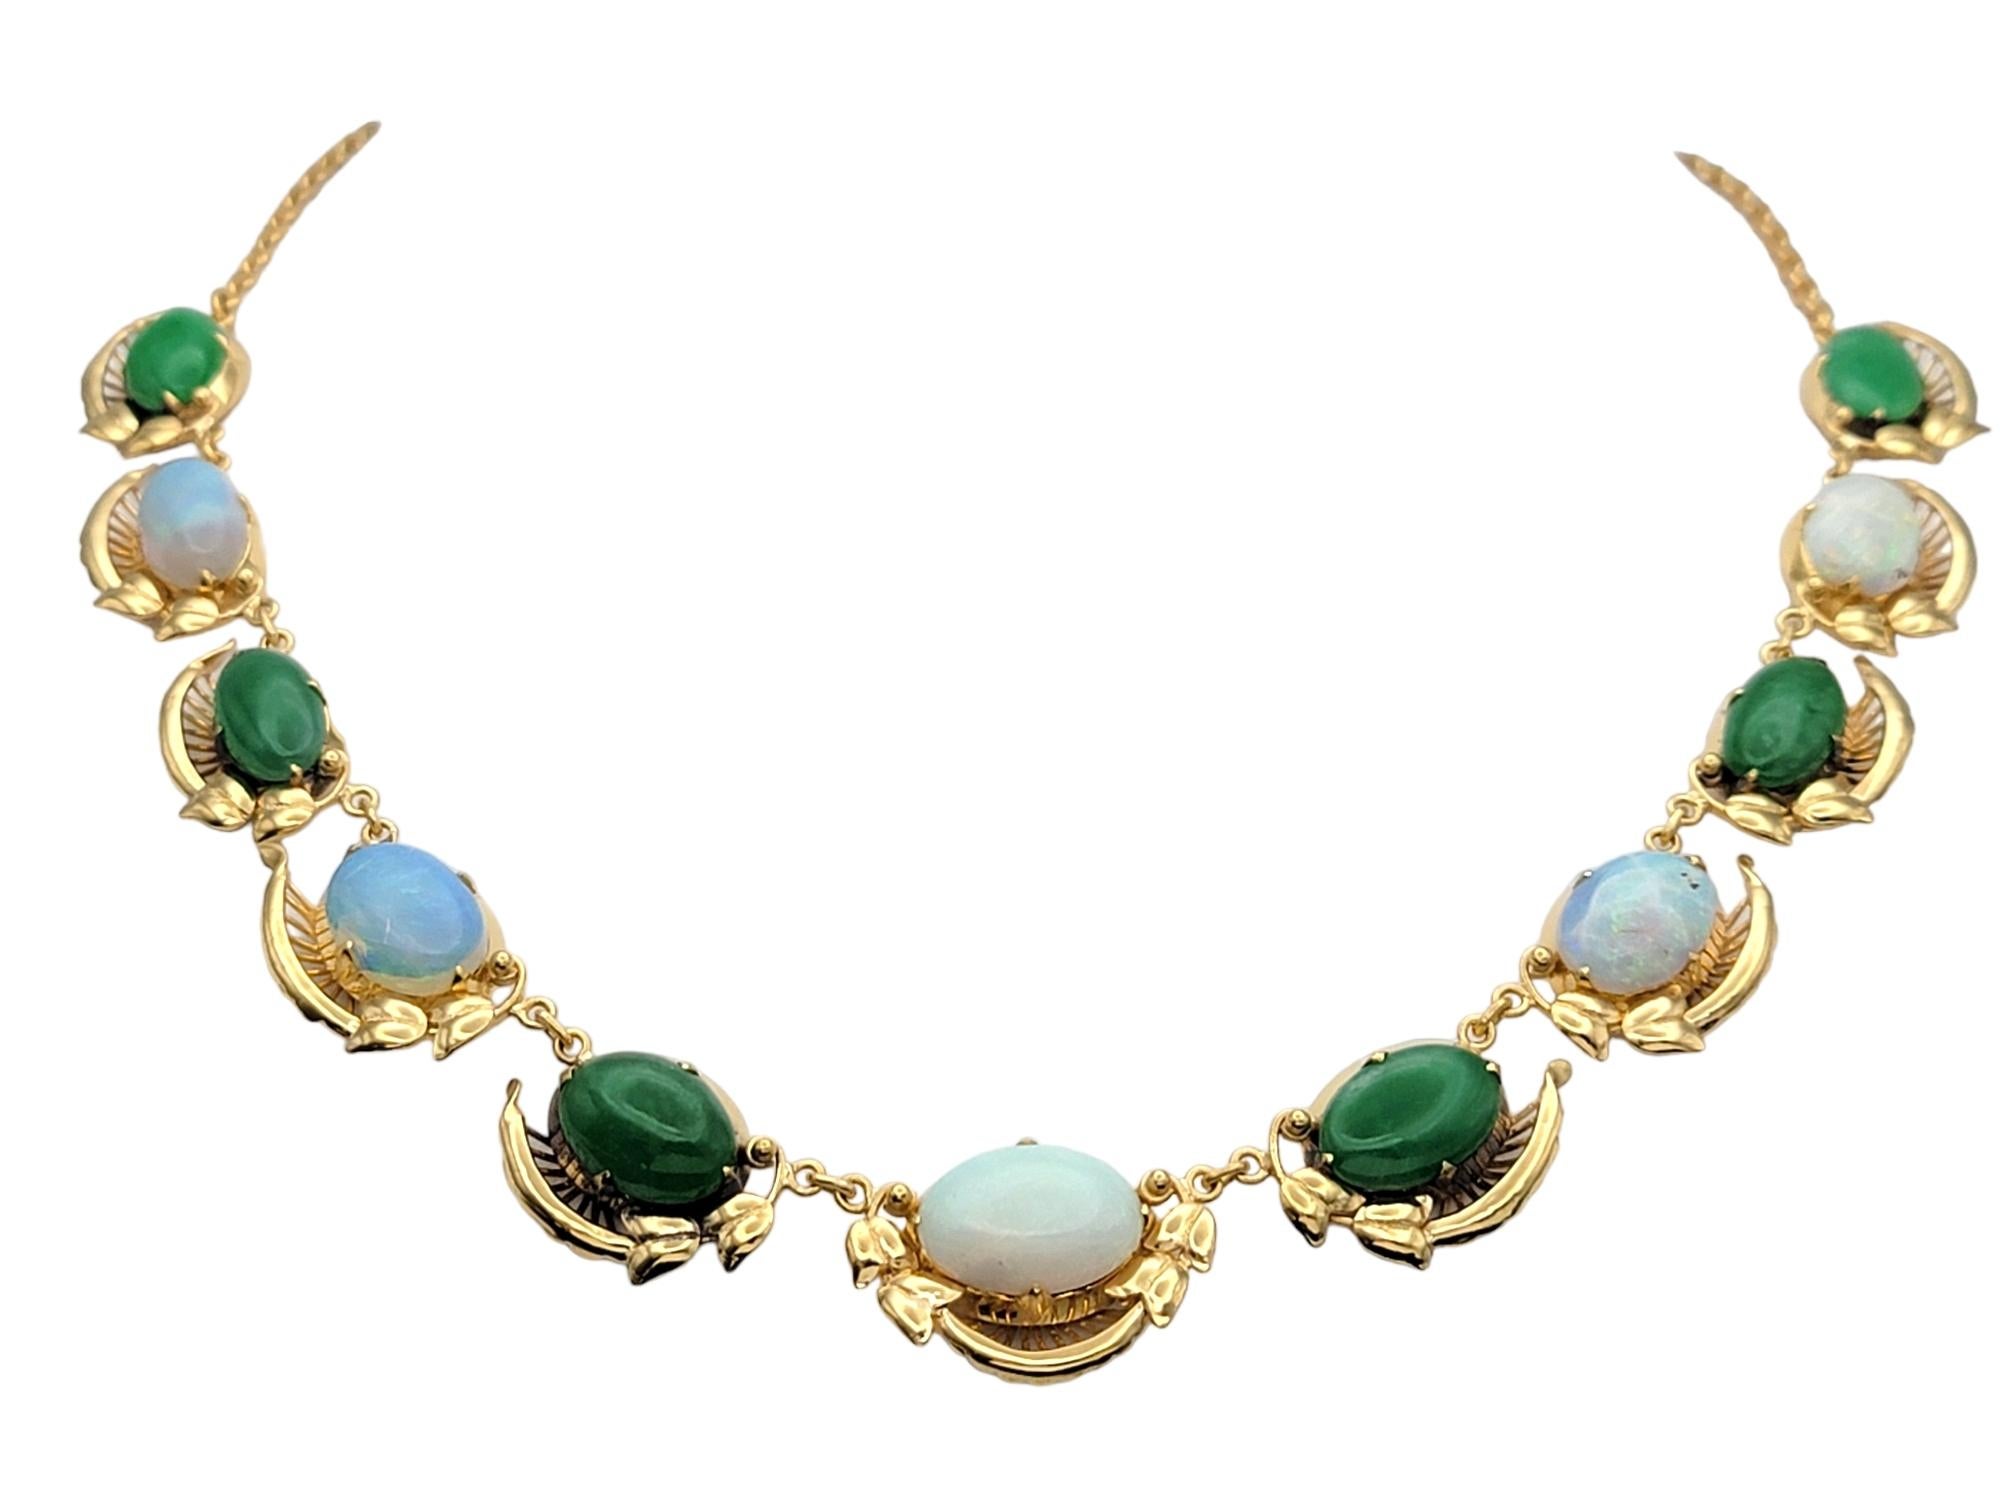 Graduated Oval Cabochon Jade and Opal Choker Necklace in Polished Yellow Gold In Good Condition For Sale In Scottsdale, AZ